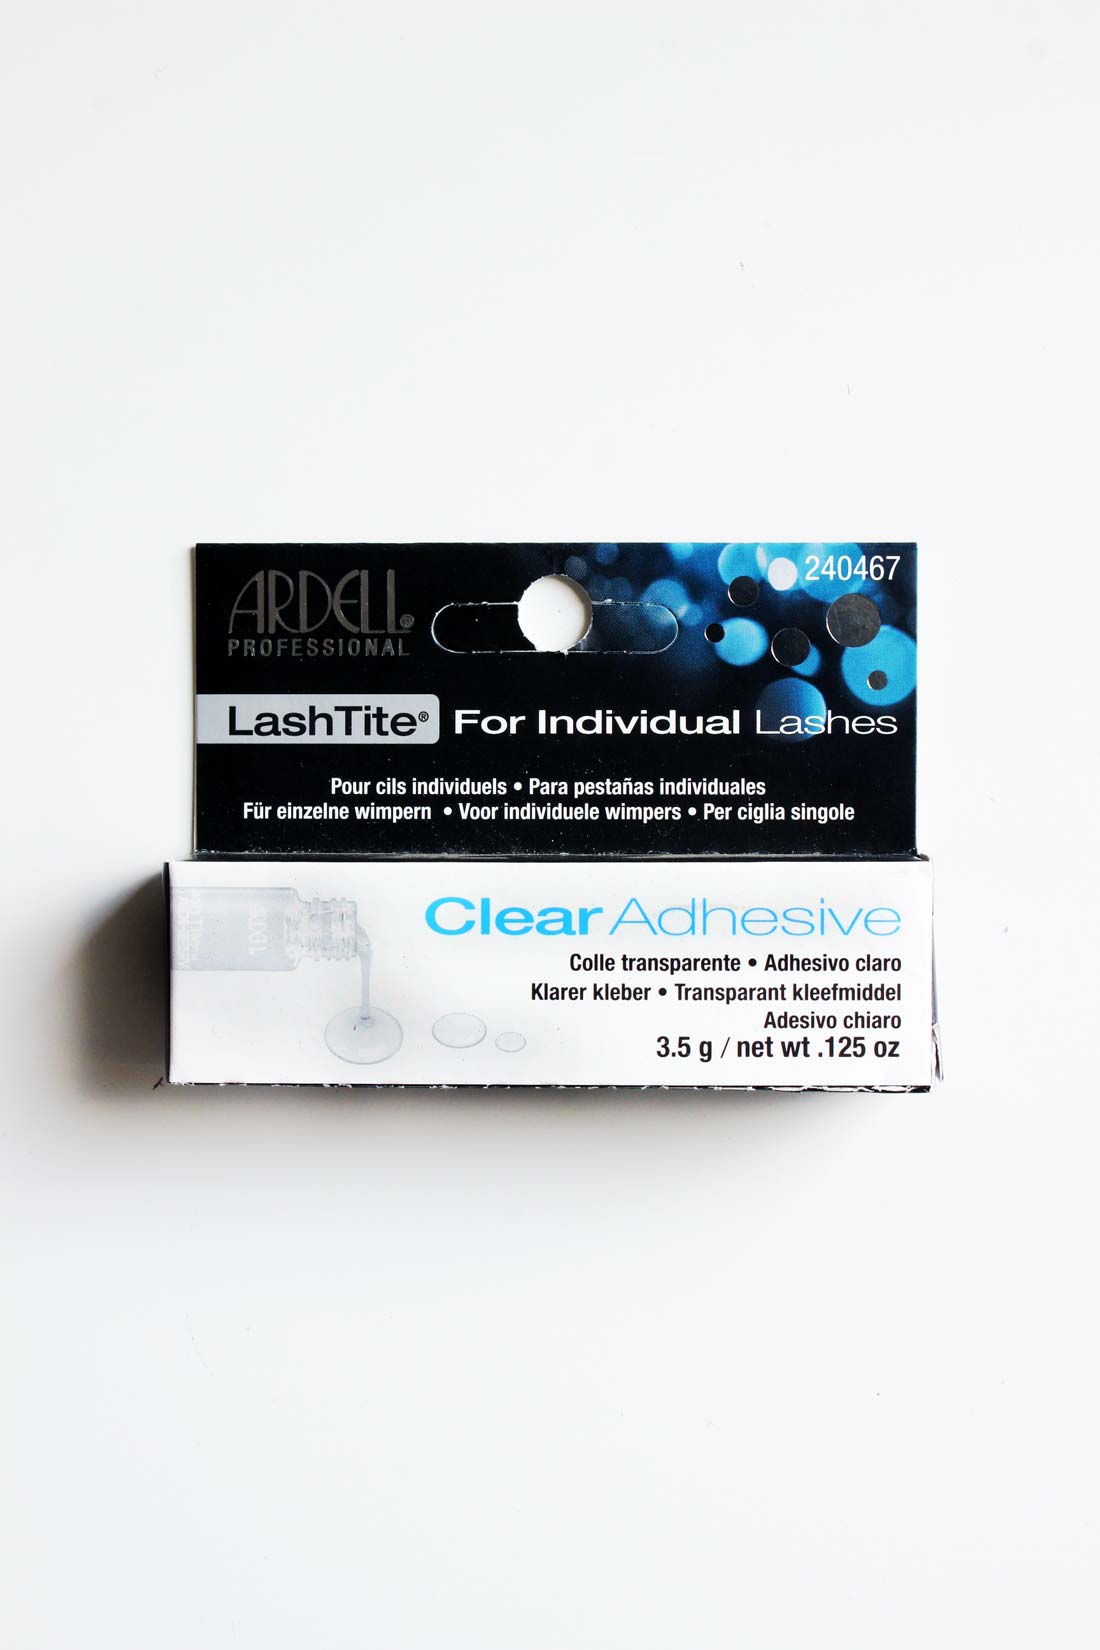 Clear Adhesive for Individual Lashes